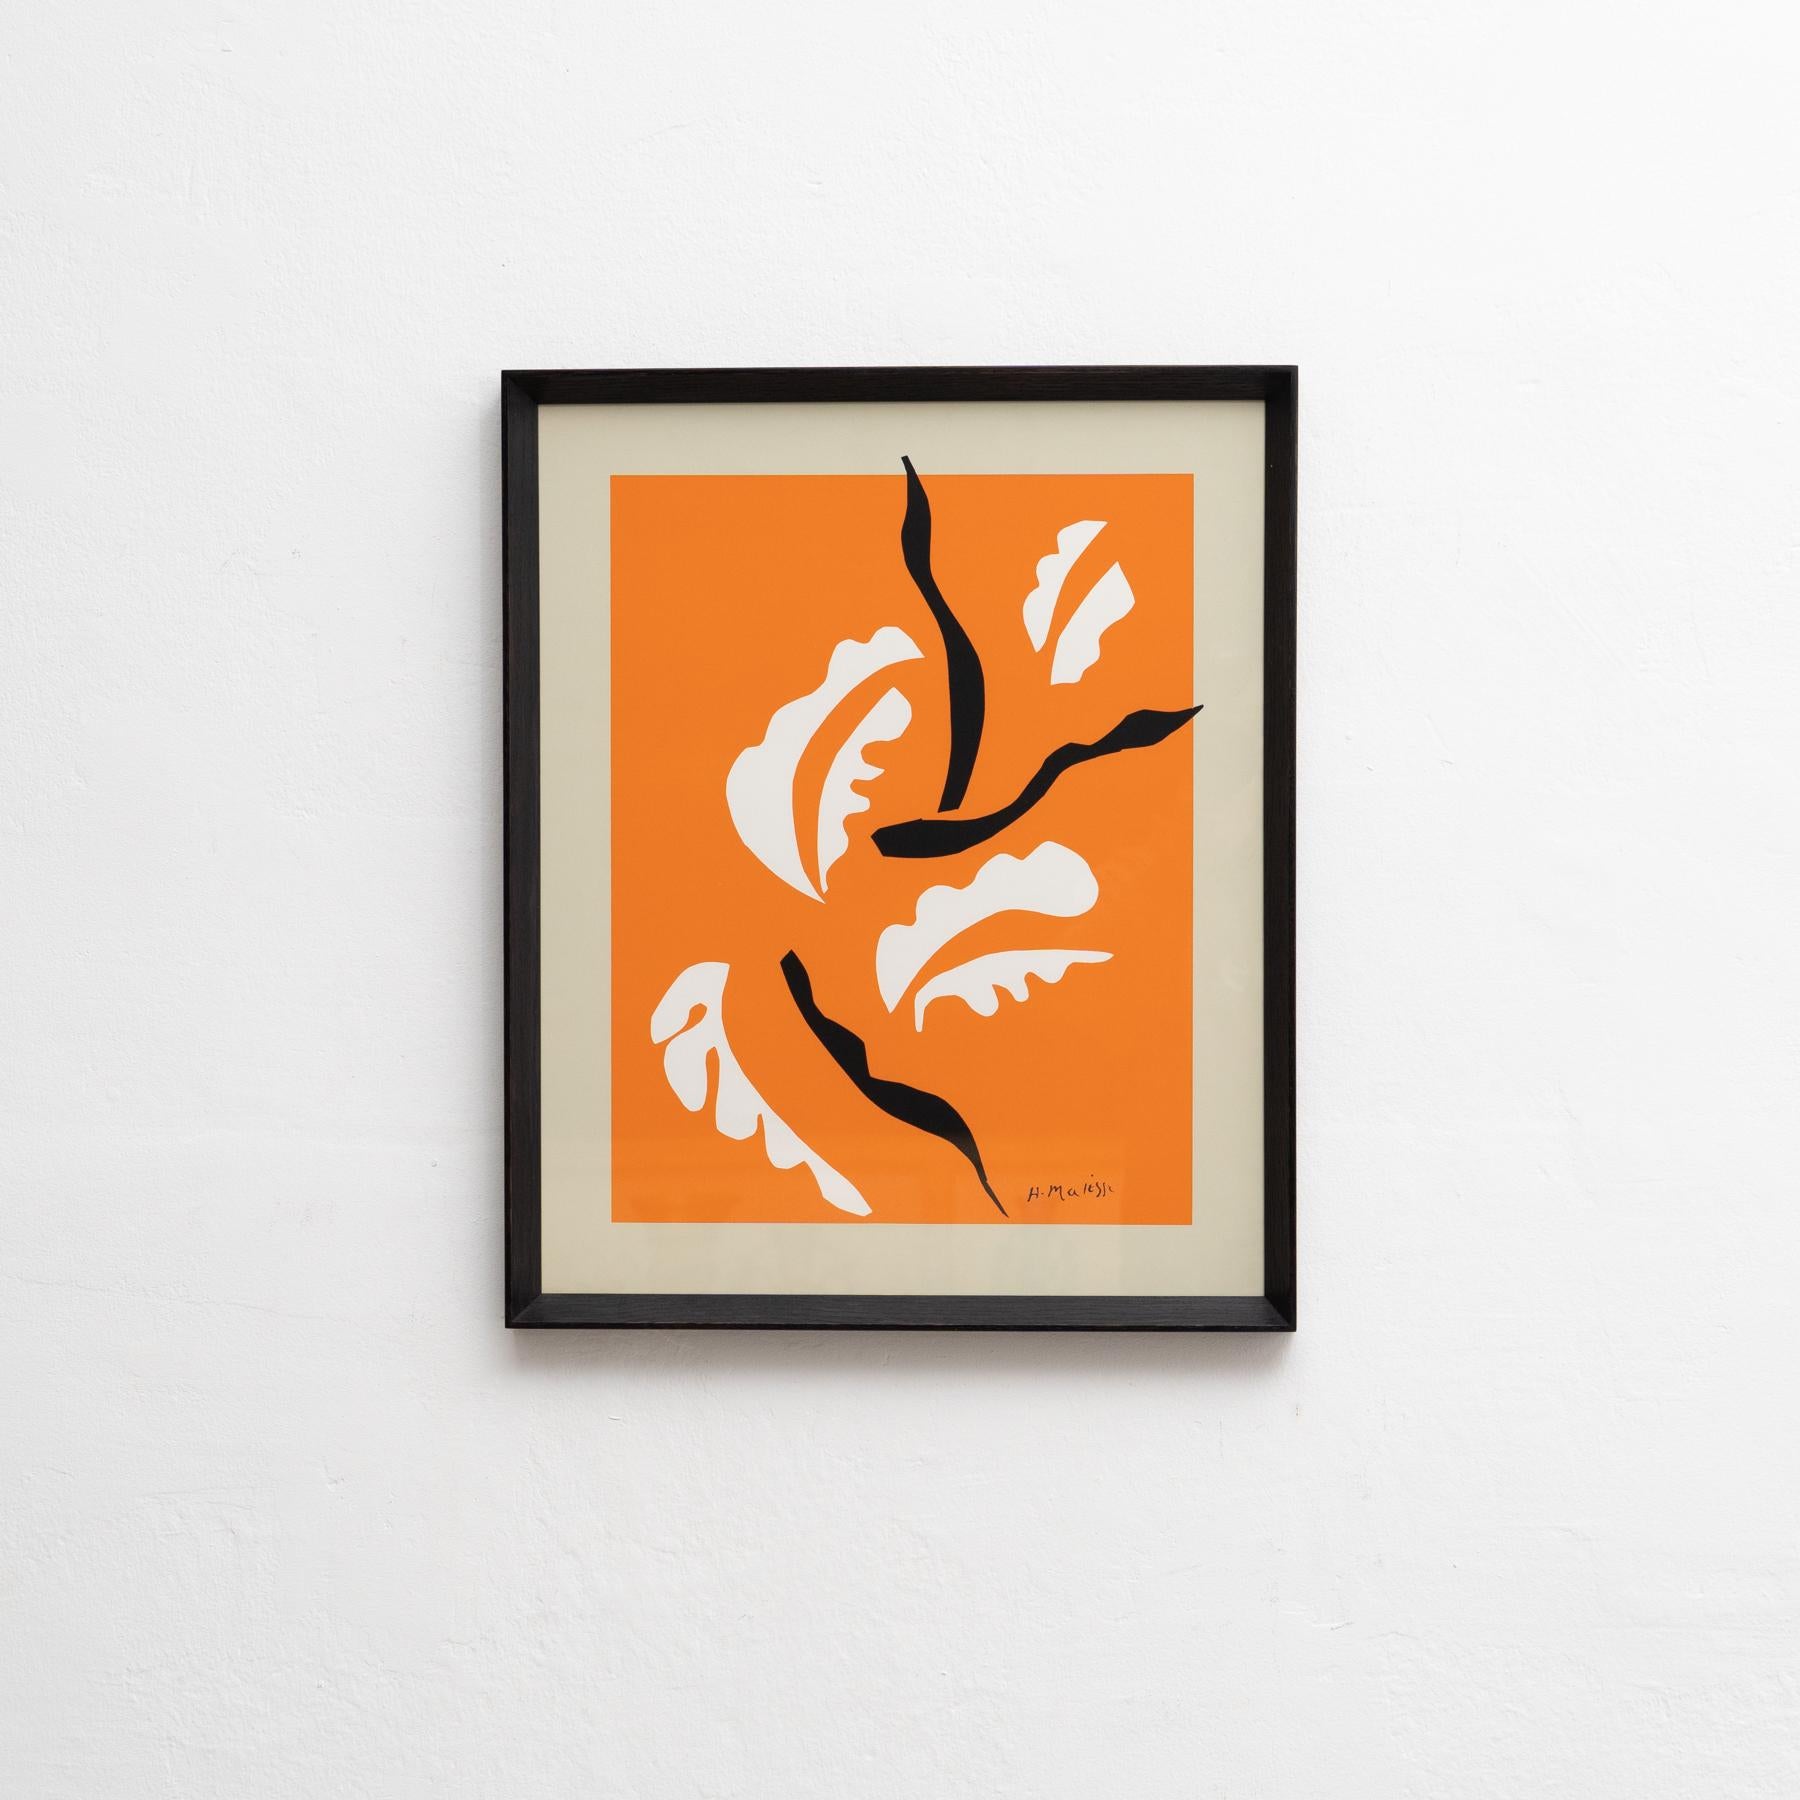 Color lithograph after the work by Henri Matisse,
Framed on high quality frame in solid lacquered wood.

Signed in the stone.

Henri Matisse whether working as a draftsman, a sculptor, a printmaker or a painter Henri Matisse was a master of color.